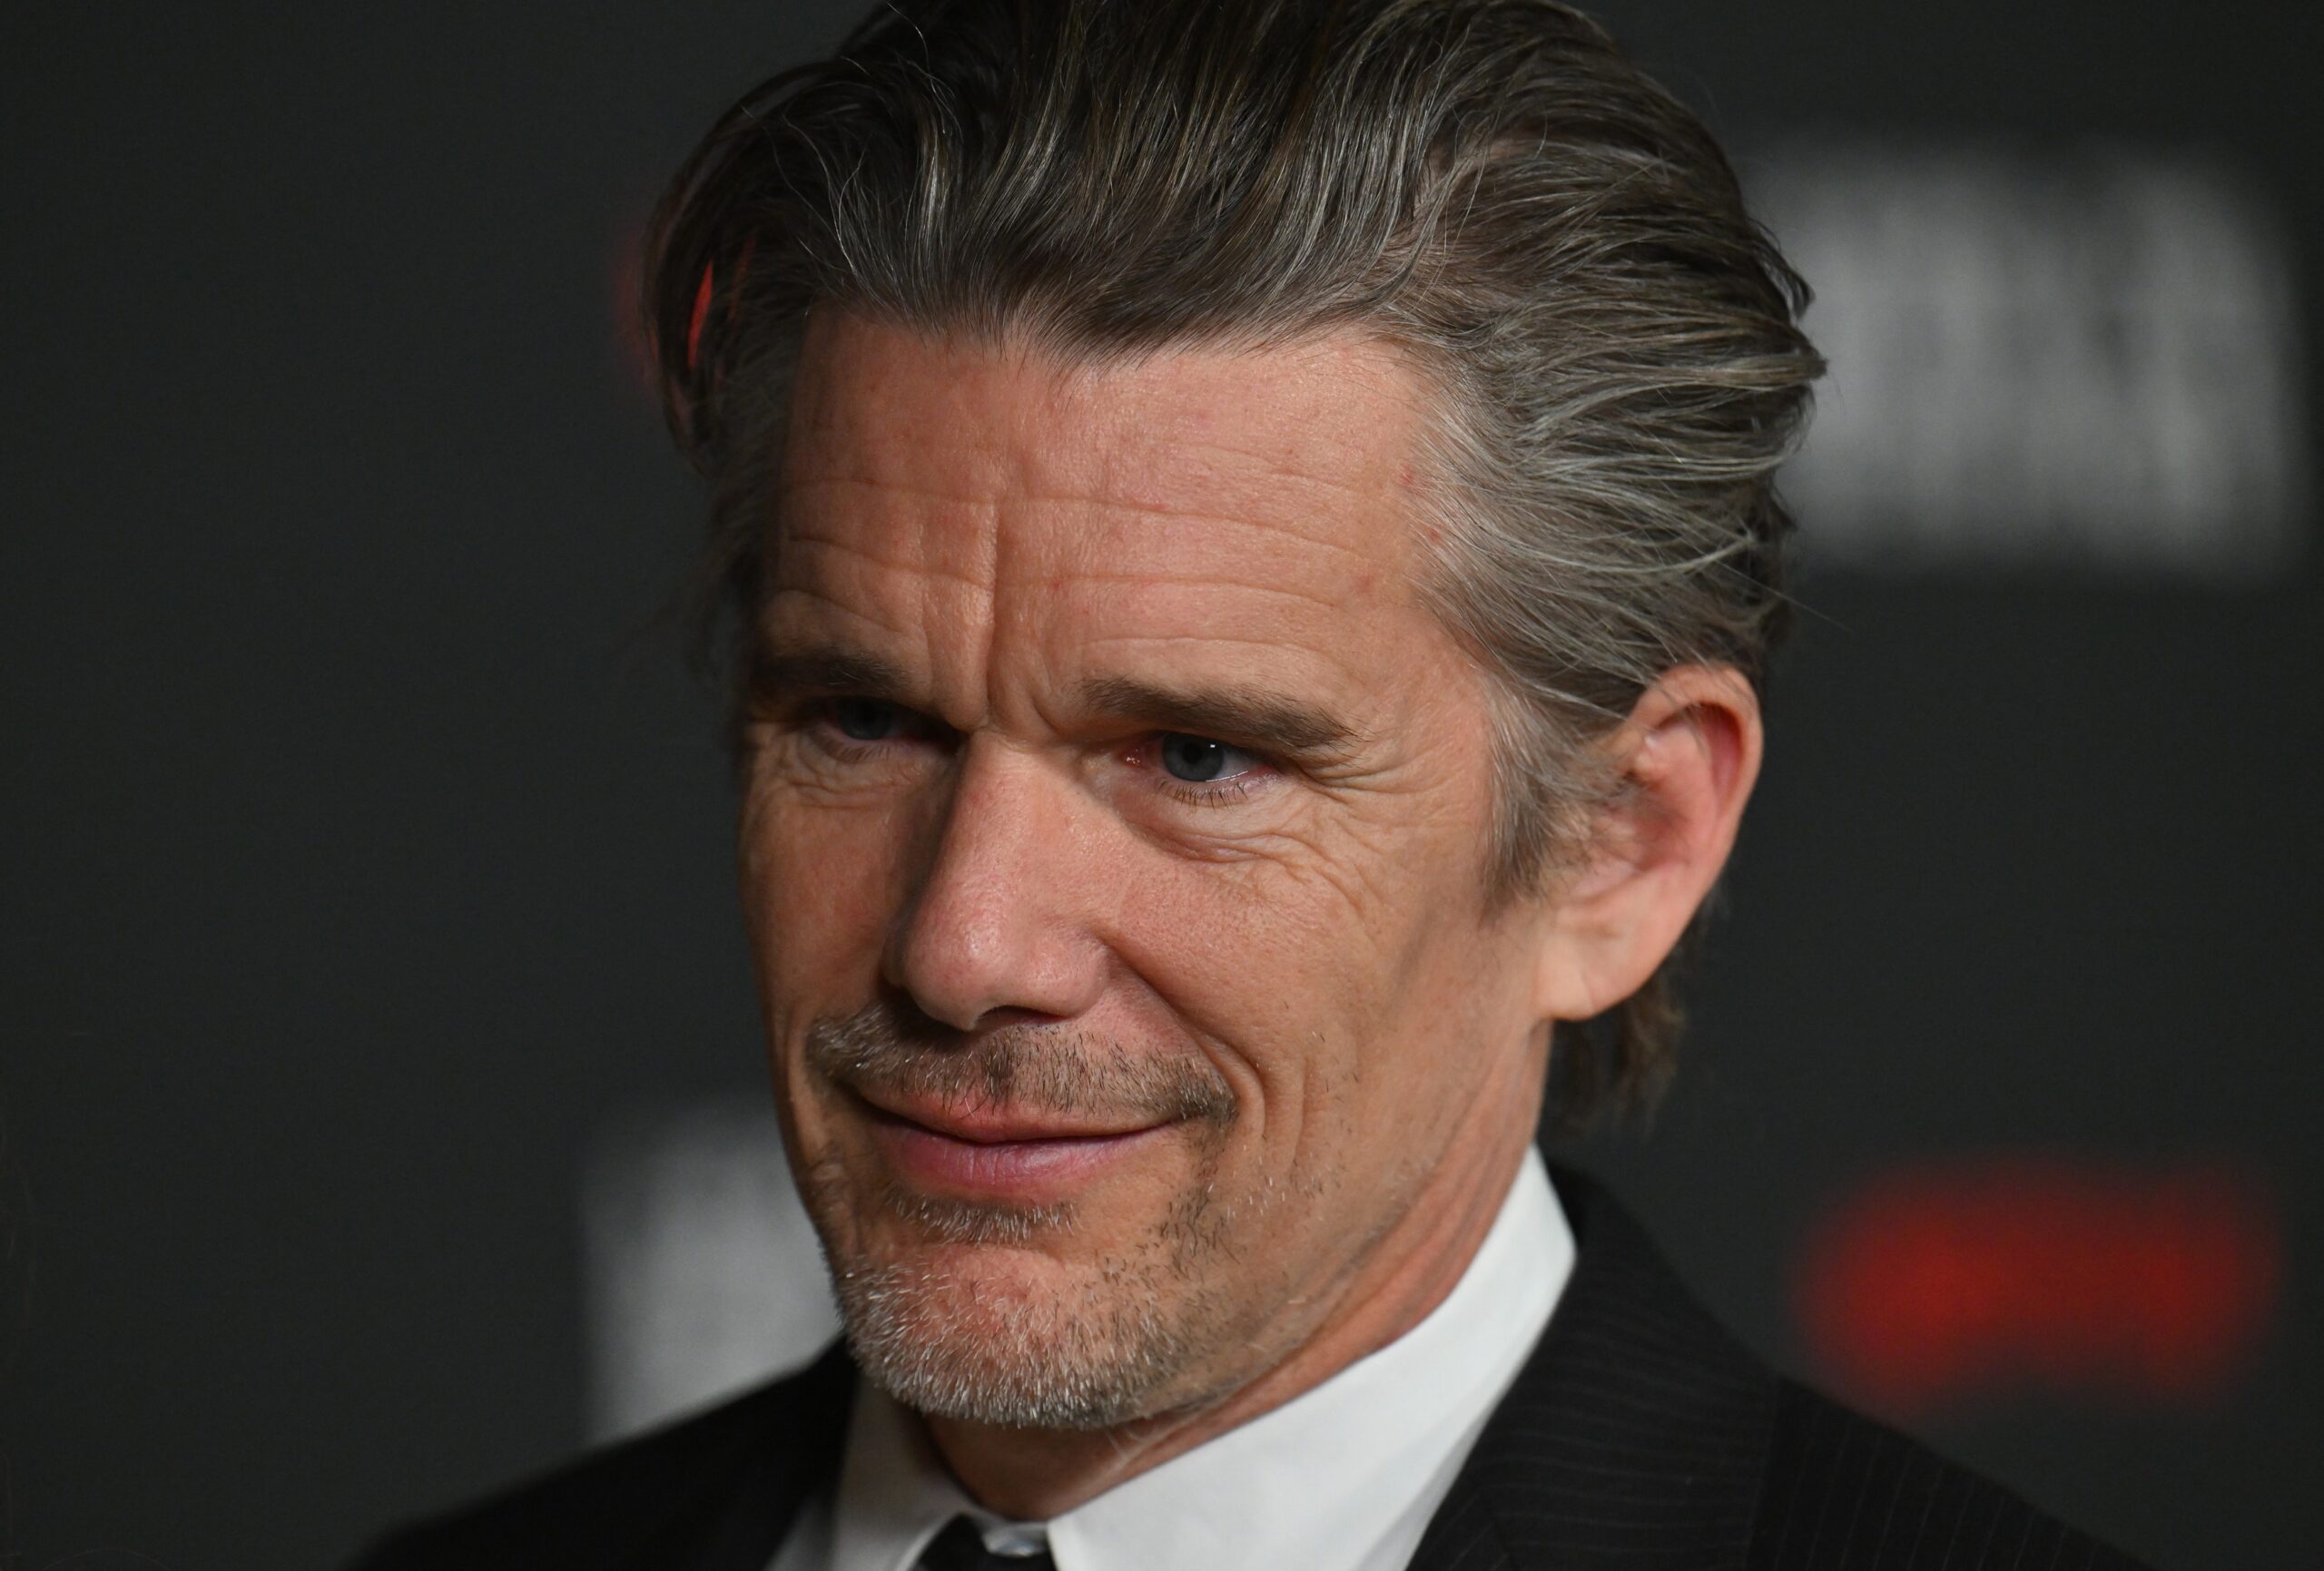 US actor Ethan Hawke attends Netflix's "Leave The World Behind" premiere at Paris Theater in New York City on December 4, 2023.,Image: 826795456, License: Rights-managed, Restrictions: , Model Release: no, Credit line: ANGELA WEISS / AFP / Profimedia